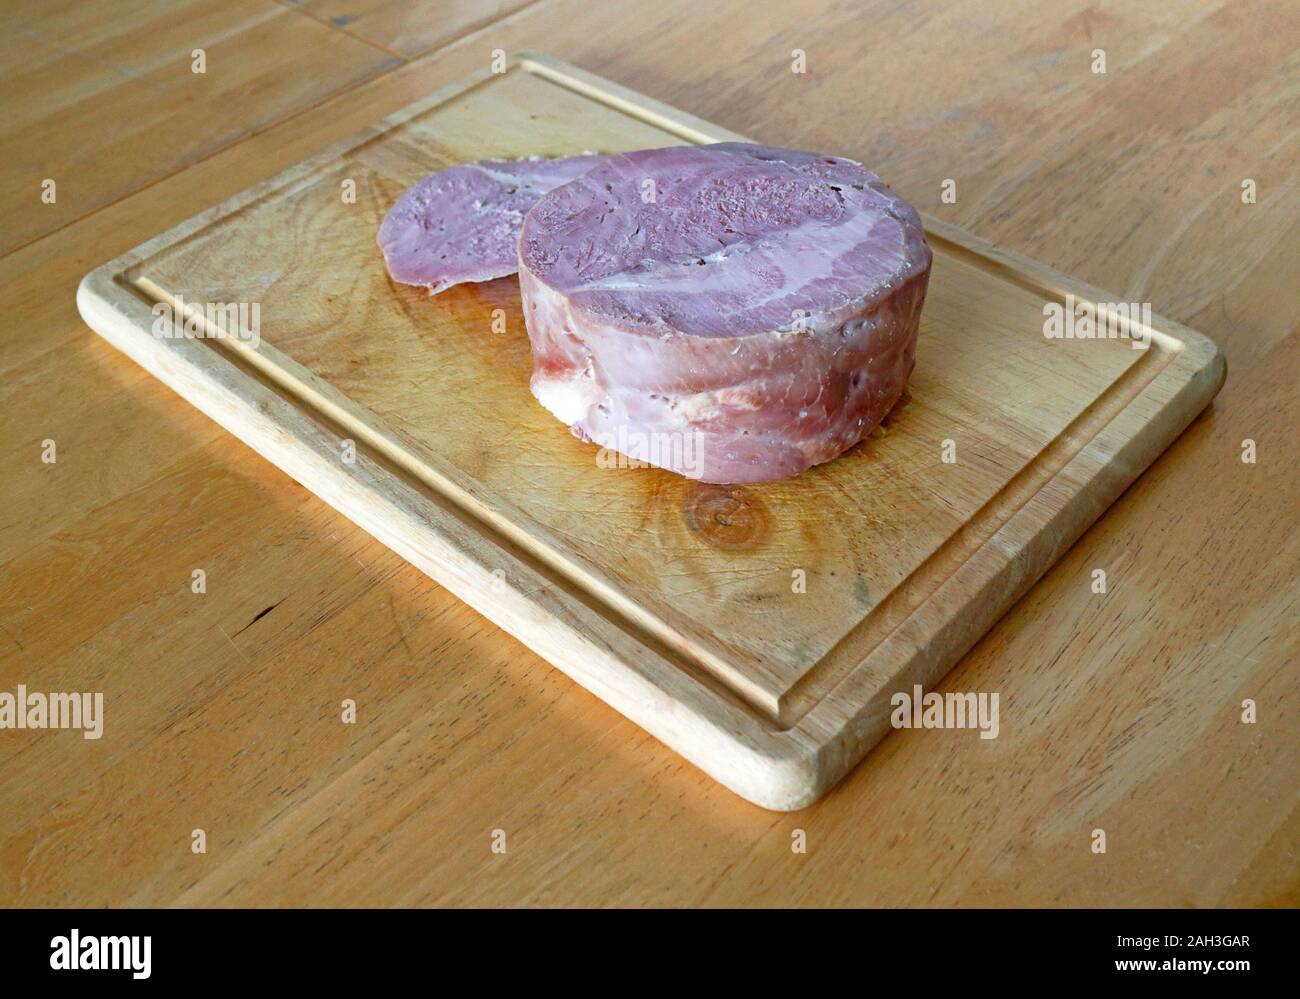 A freshly home cooked smoked gammon joint with one slice by the side on a wooden chopping board. Stock Photo